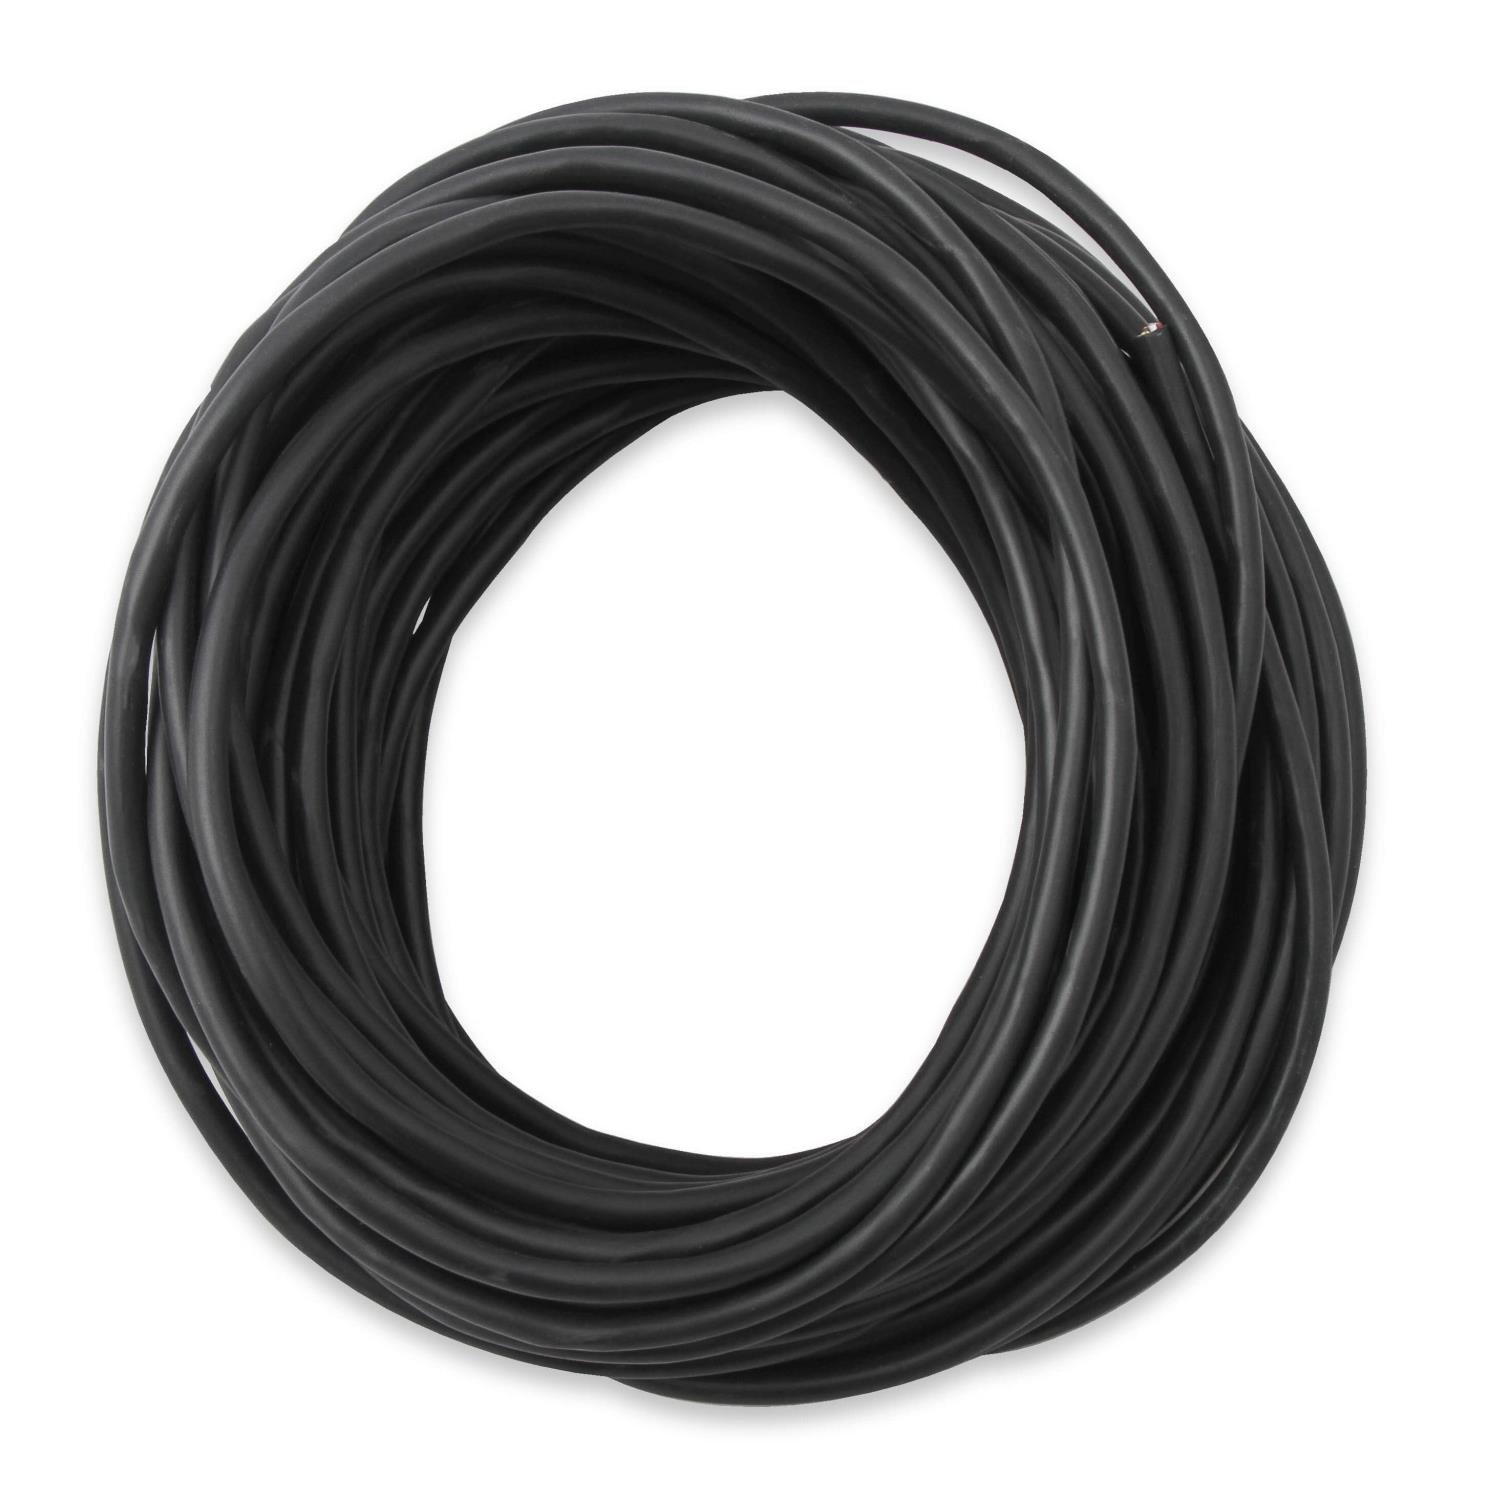 EFI Shielded 7 Conductor Cable in 100 ft. Length